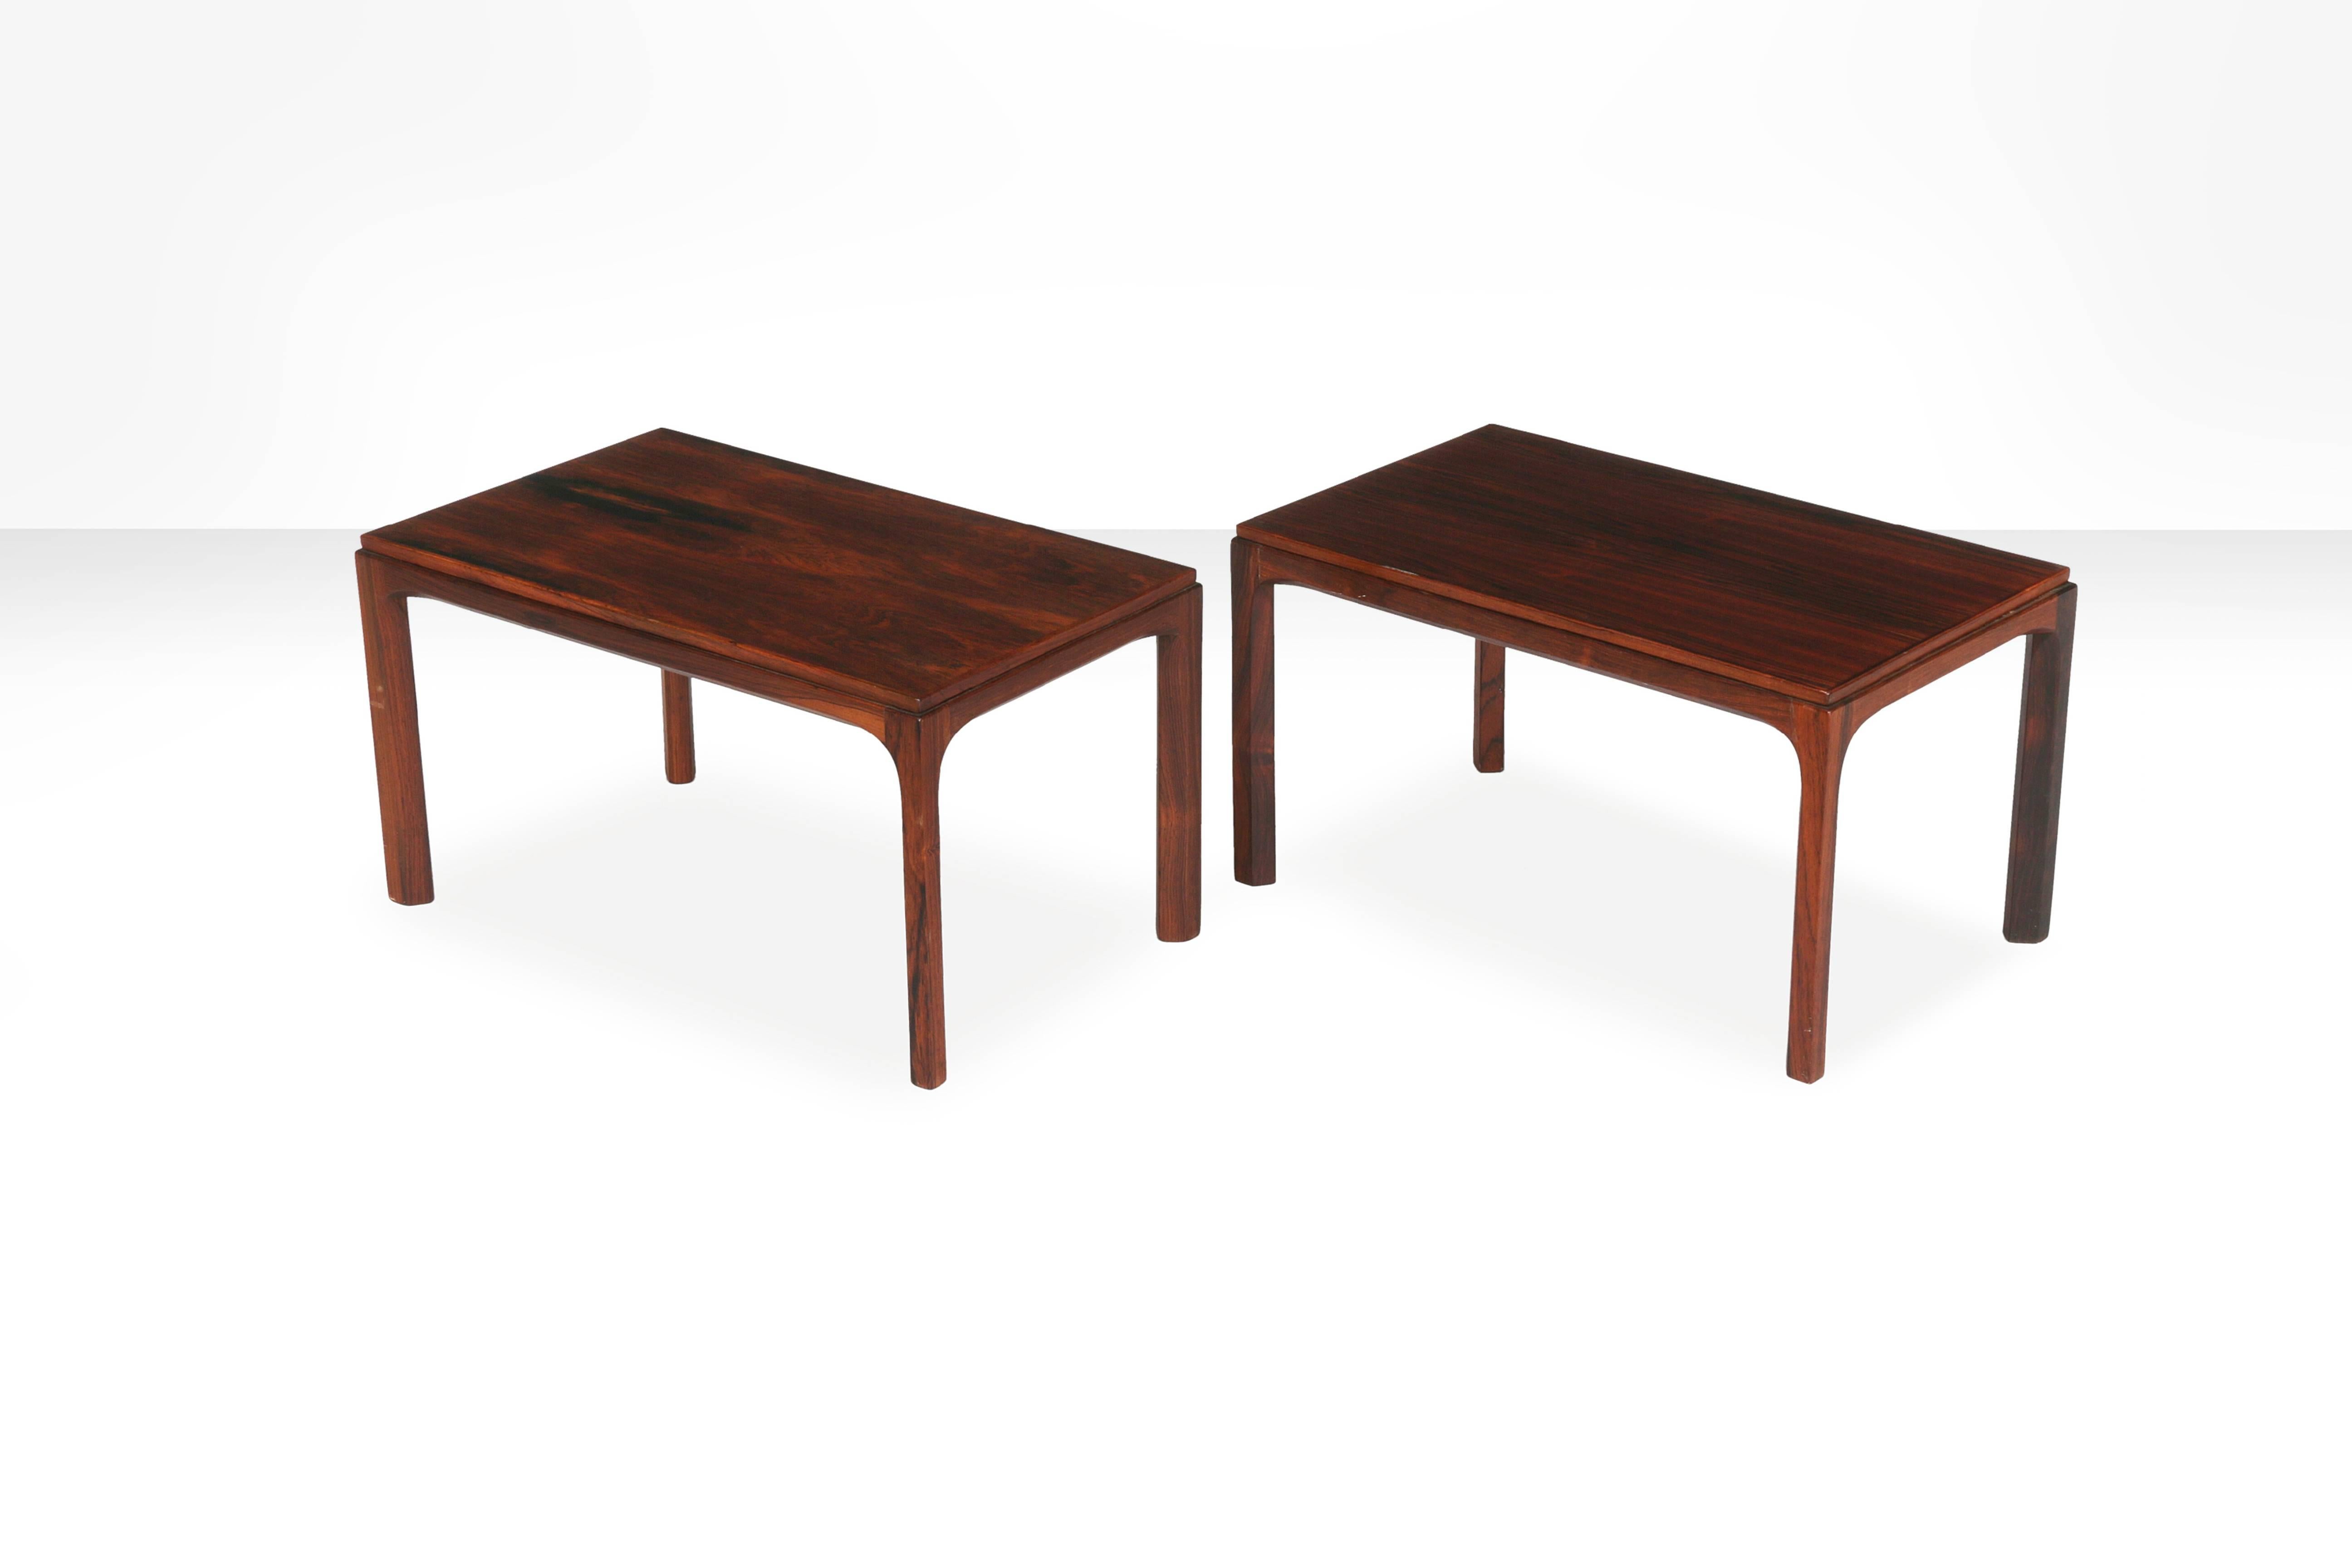 Kai Kristiansen: A pair of rectangular side tables with profiled legs. Manufactured and stamped by Aksel Kjersgaard

Condition:
Normal patina due to age and use. Some scratches and marks.

WORLDWIDE SHIPPING
We offer tailor made solutions for the